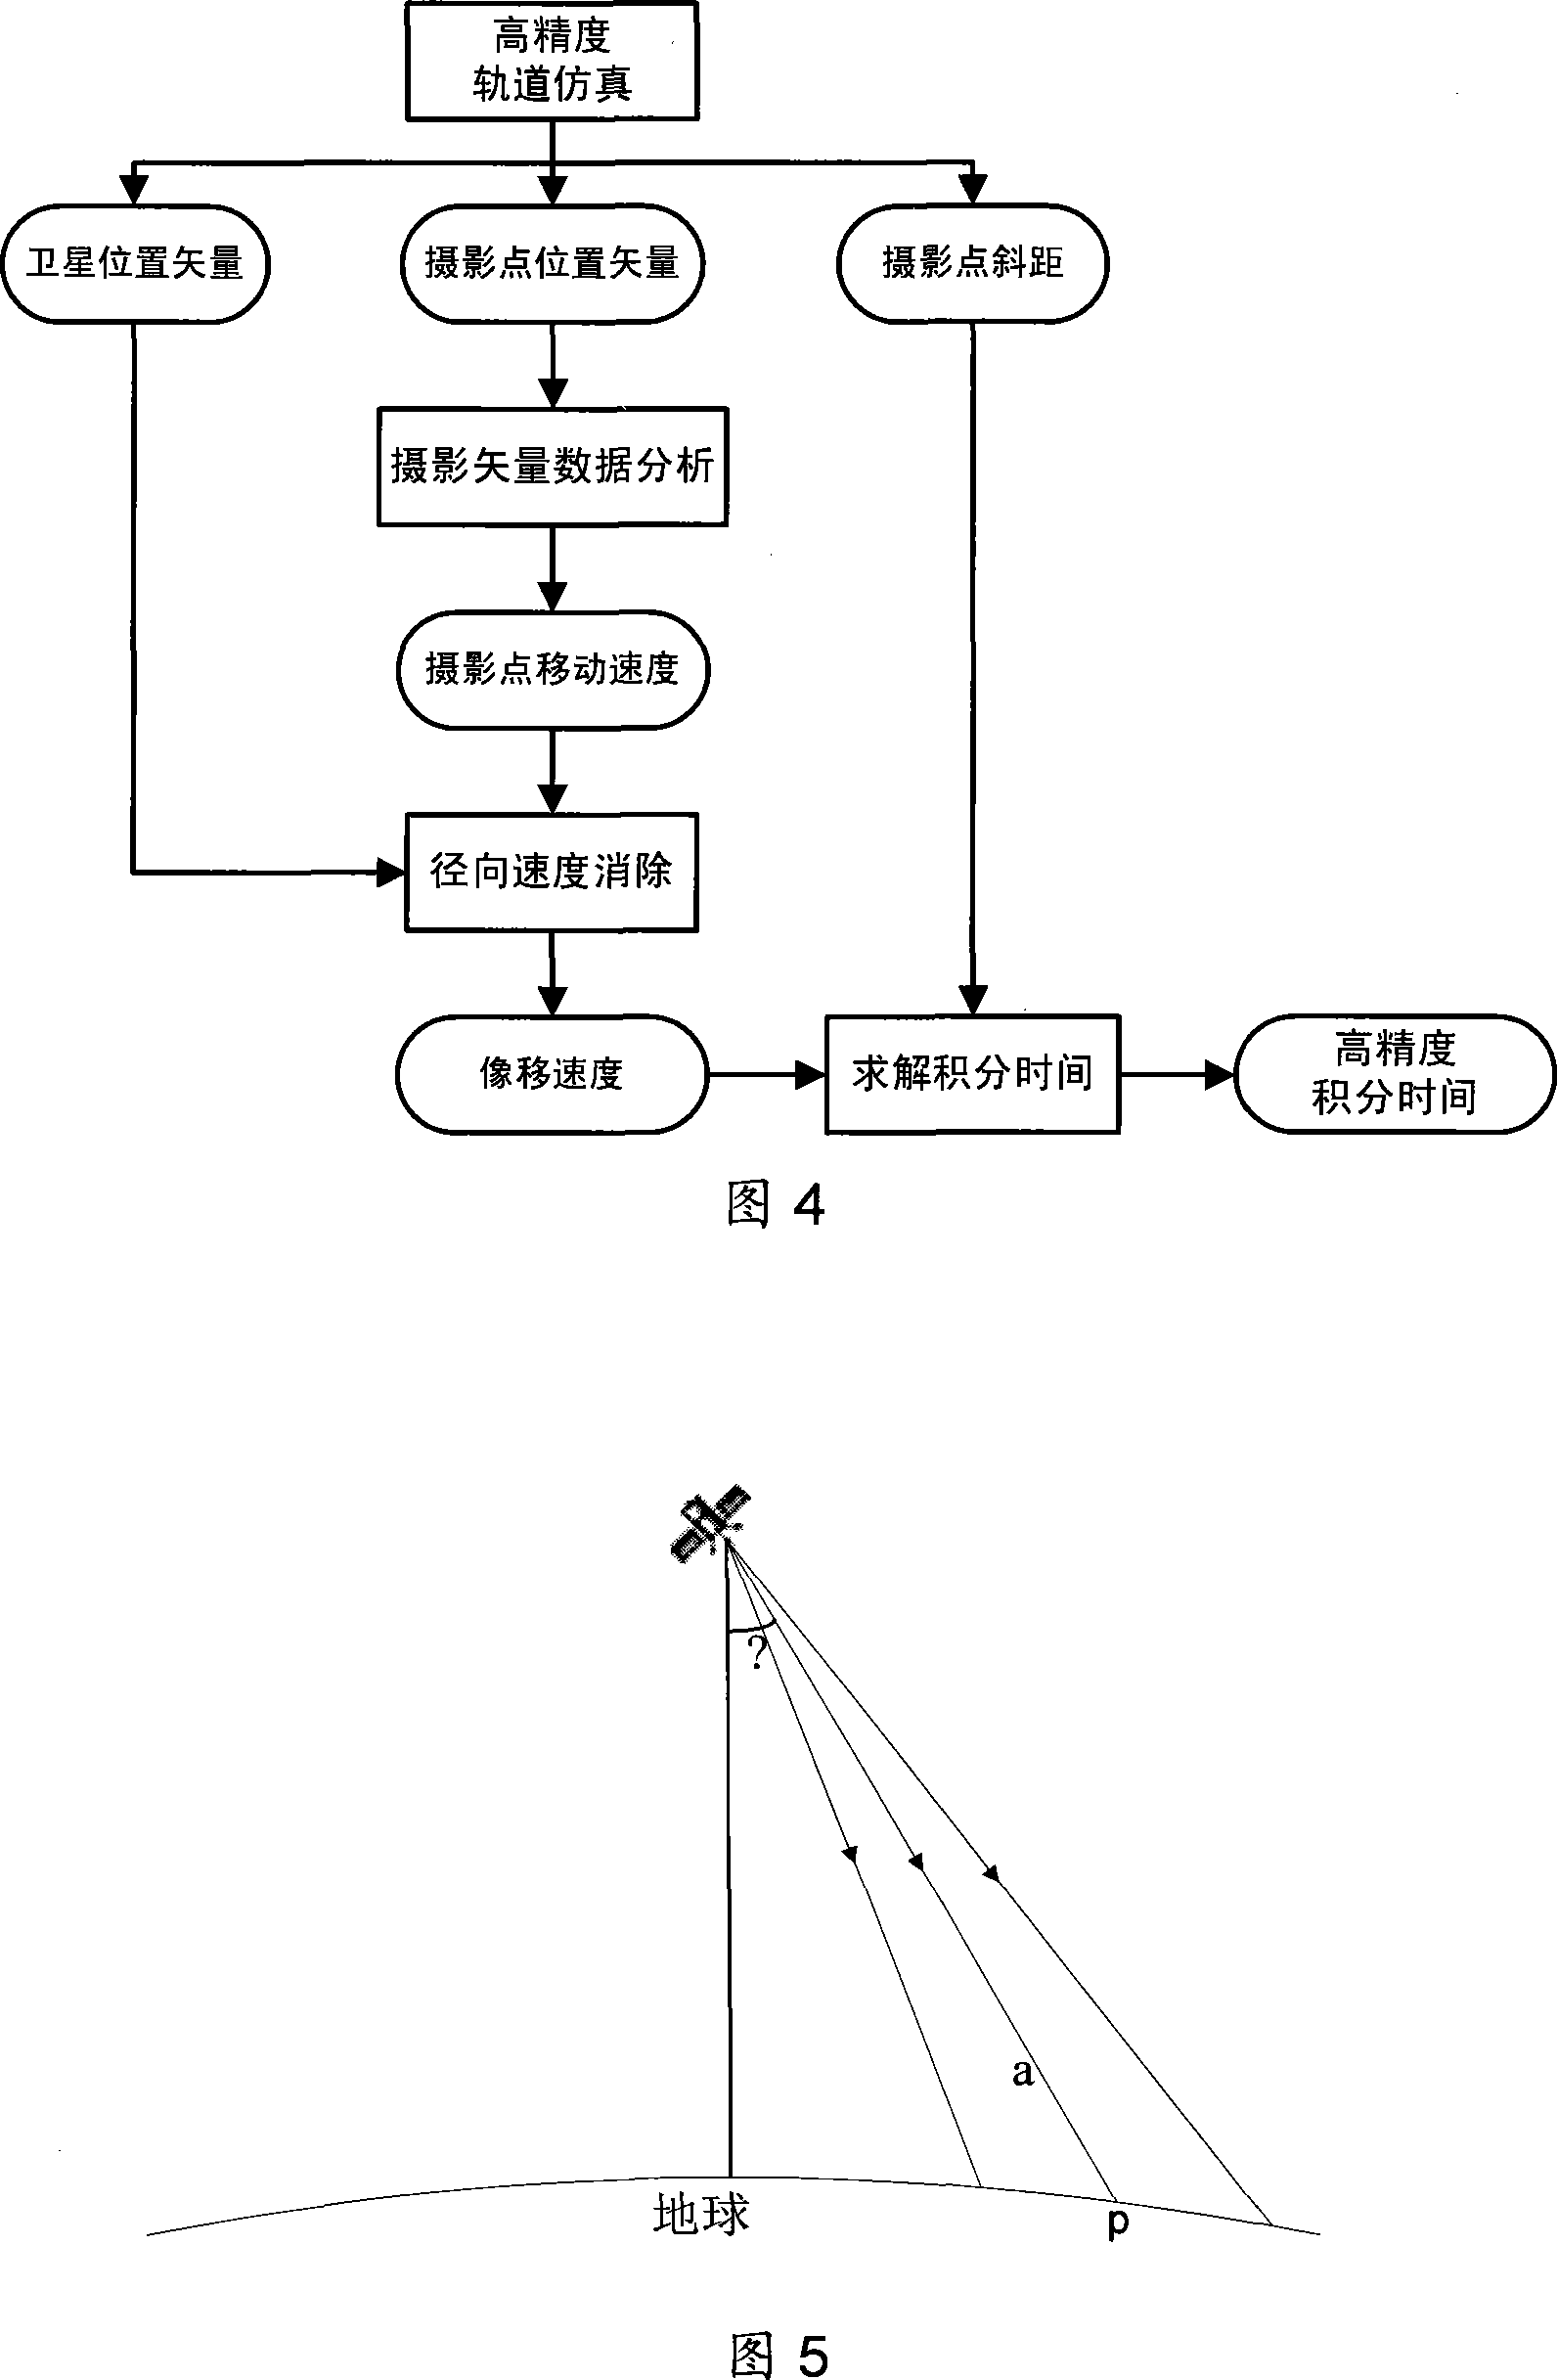 Method for calculation and regulation of integral time of star-loading TDICCD camera